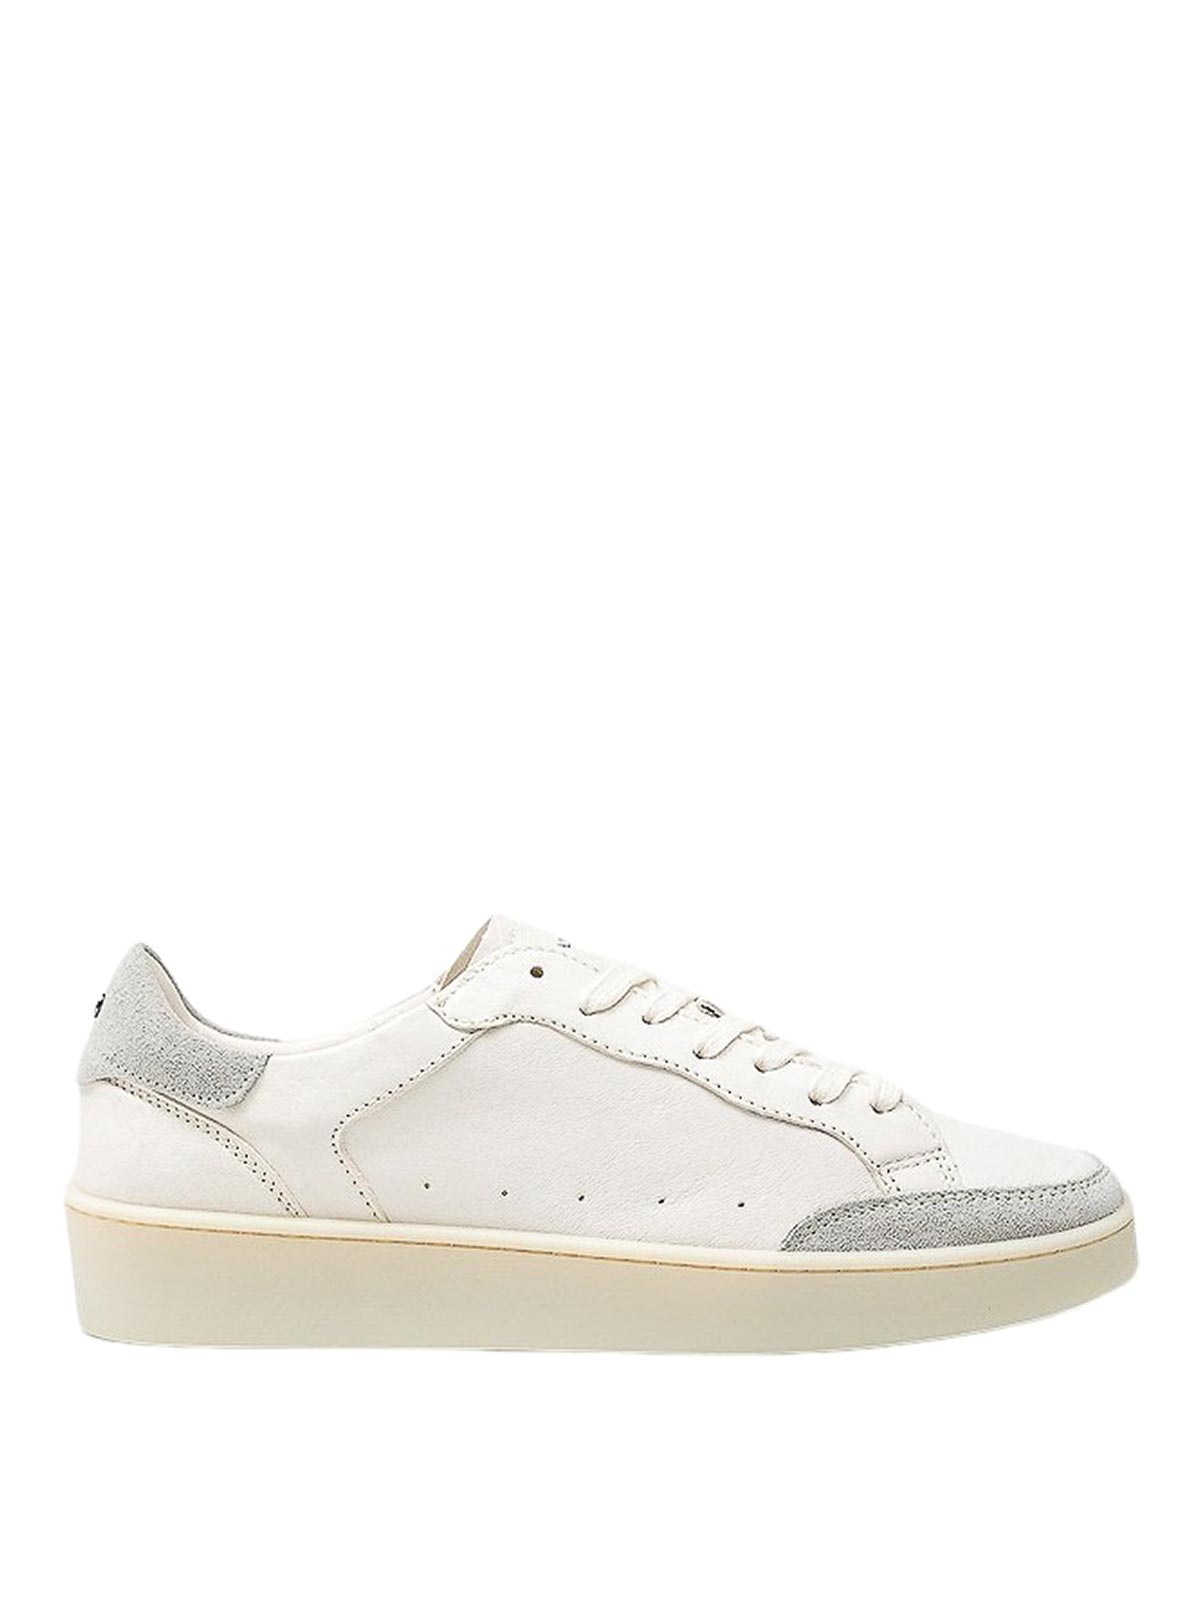 Canali Leather Sneakers In White